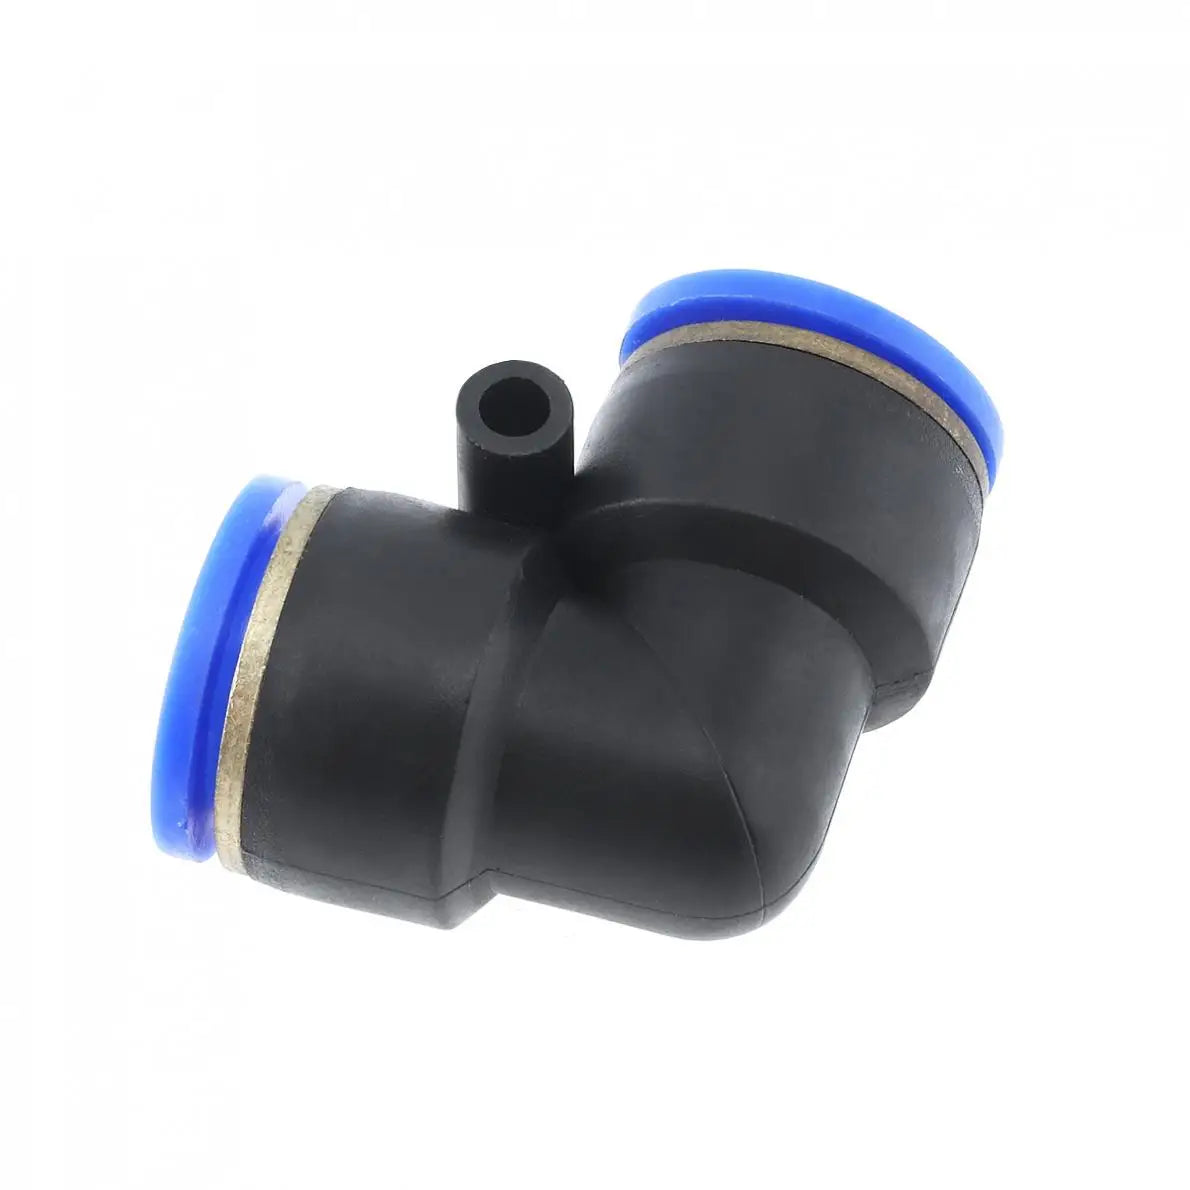 2pcs/set 16mm L Shaped Elbow Plastic Two-way Pneumatic Quick Connector Pneumatic Insertion Air Tube